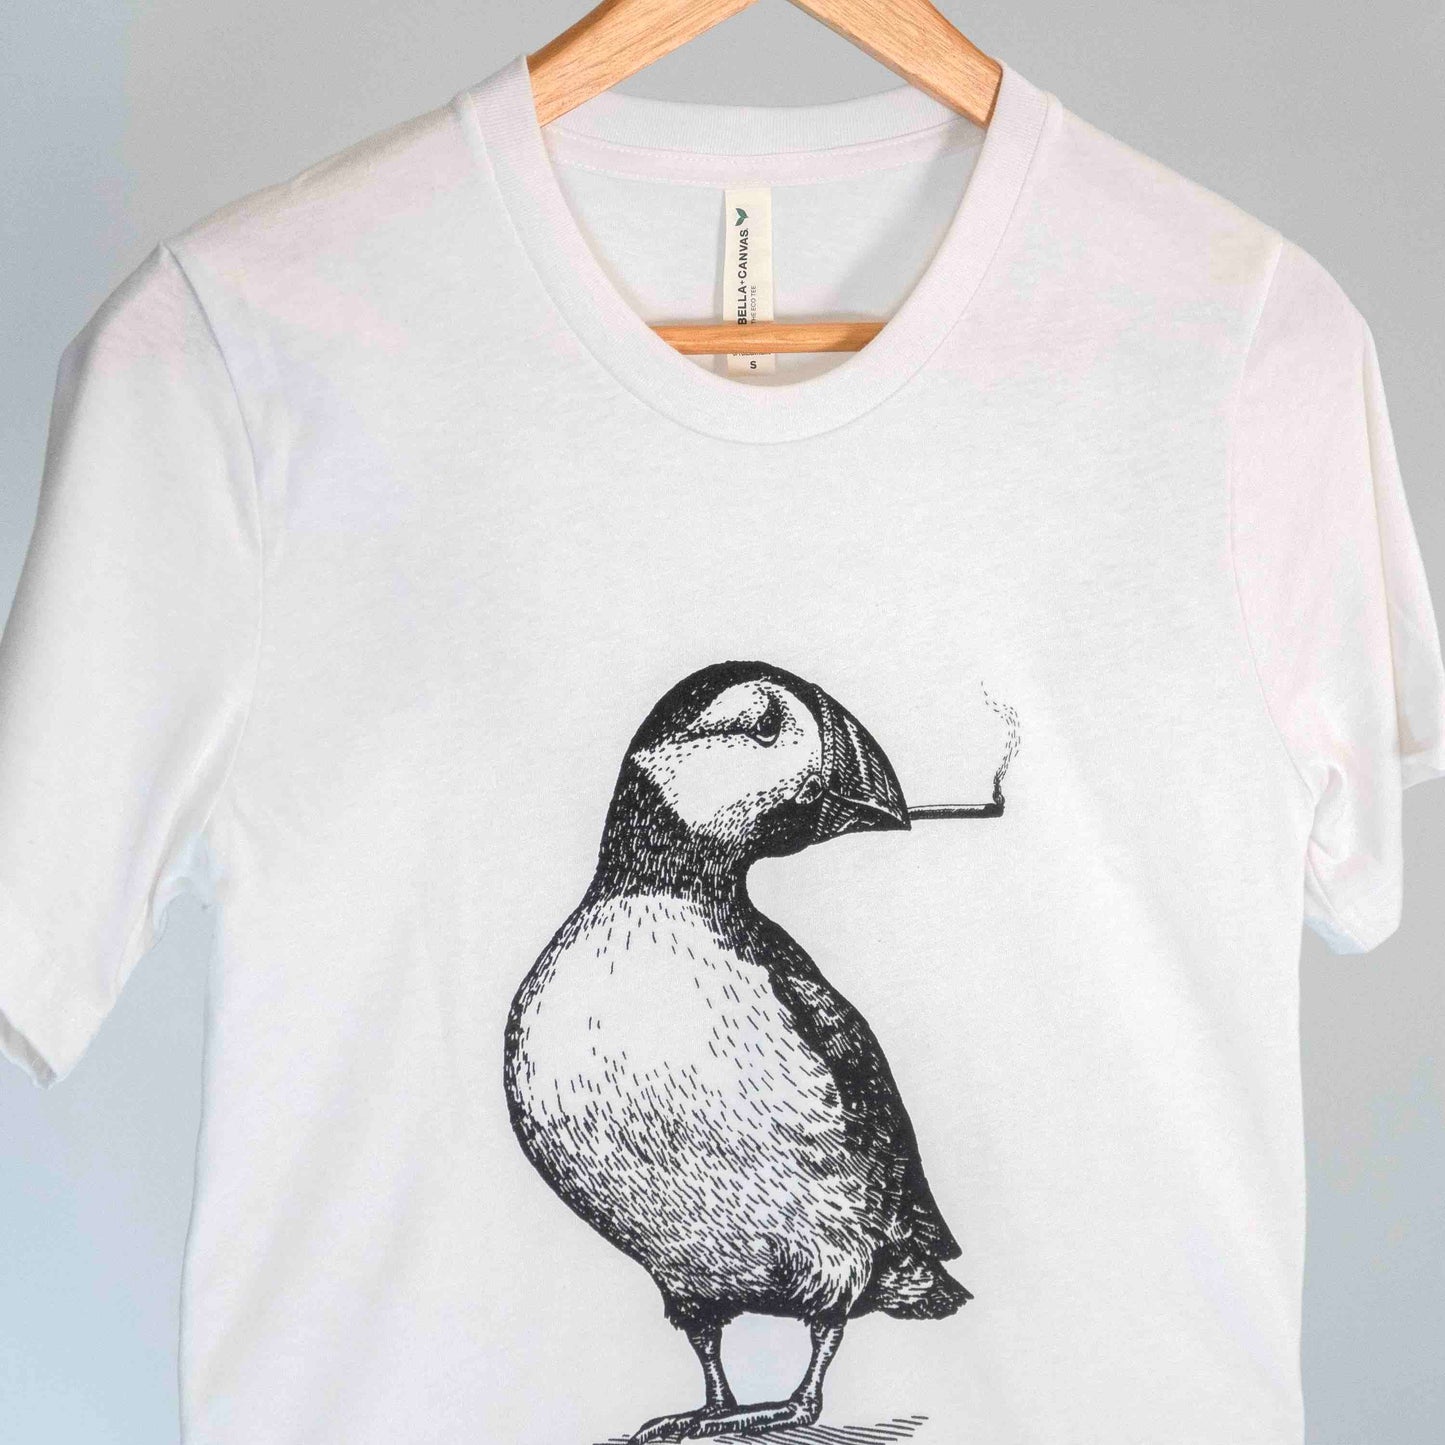 Puffin’ Puffin Eco-Tee - Sustainable Clothing - Funny Puffin Shirt - Organic and Recycled T-shirt - 420 Apparel - Maine Gift and Souvenir